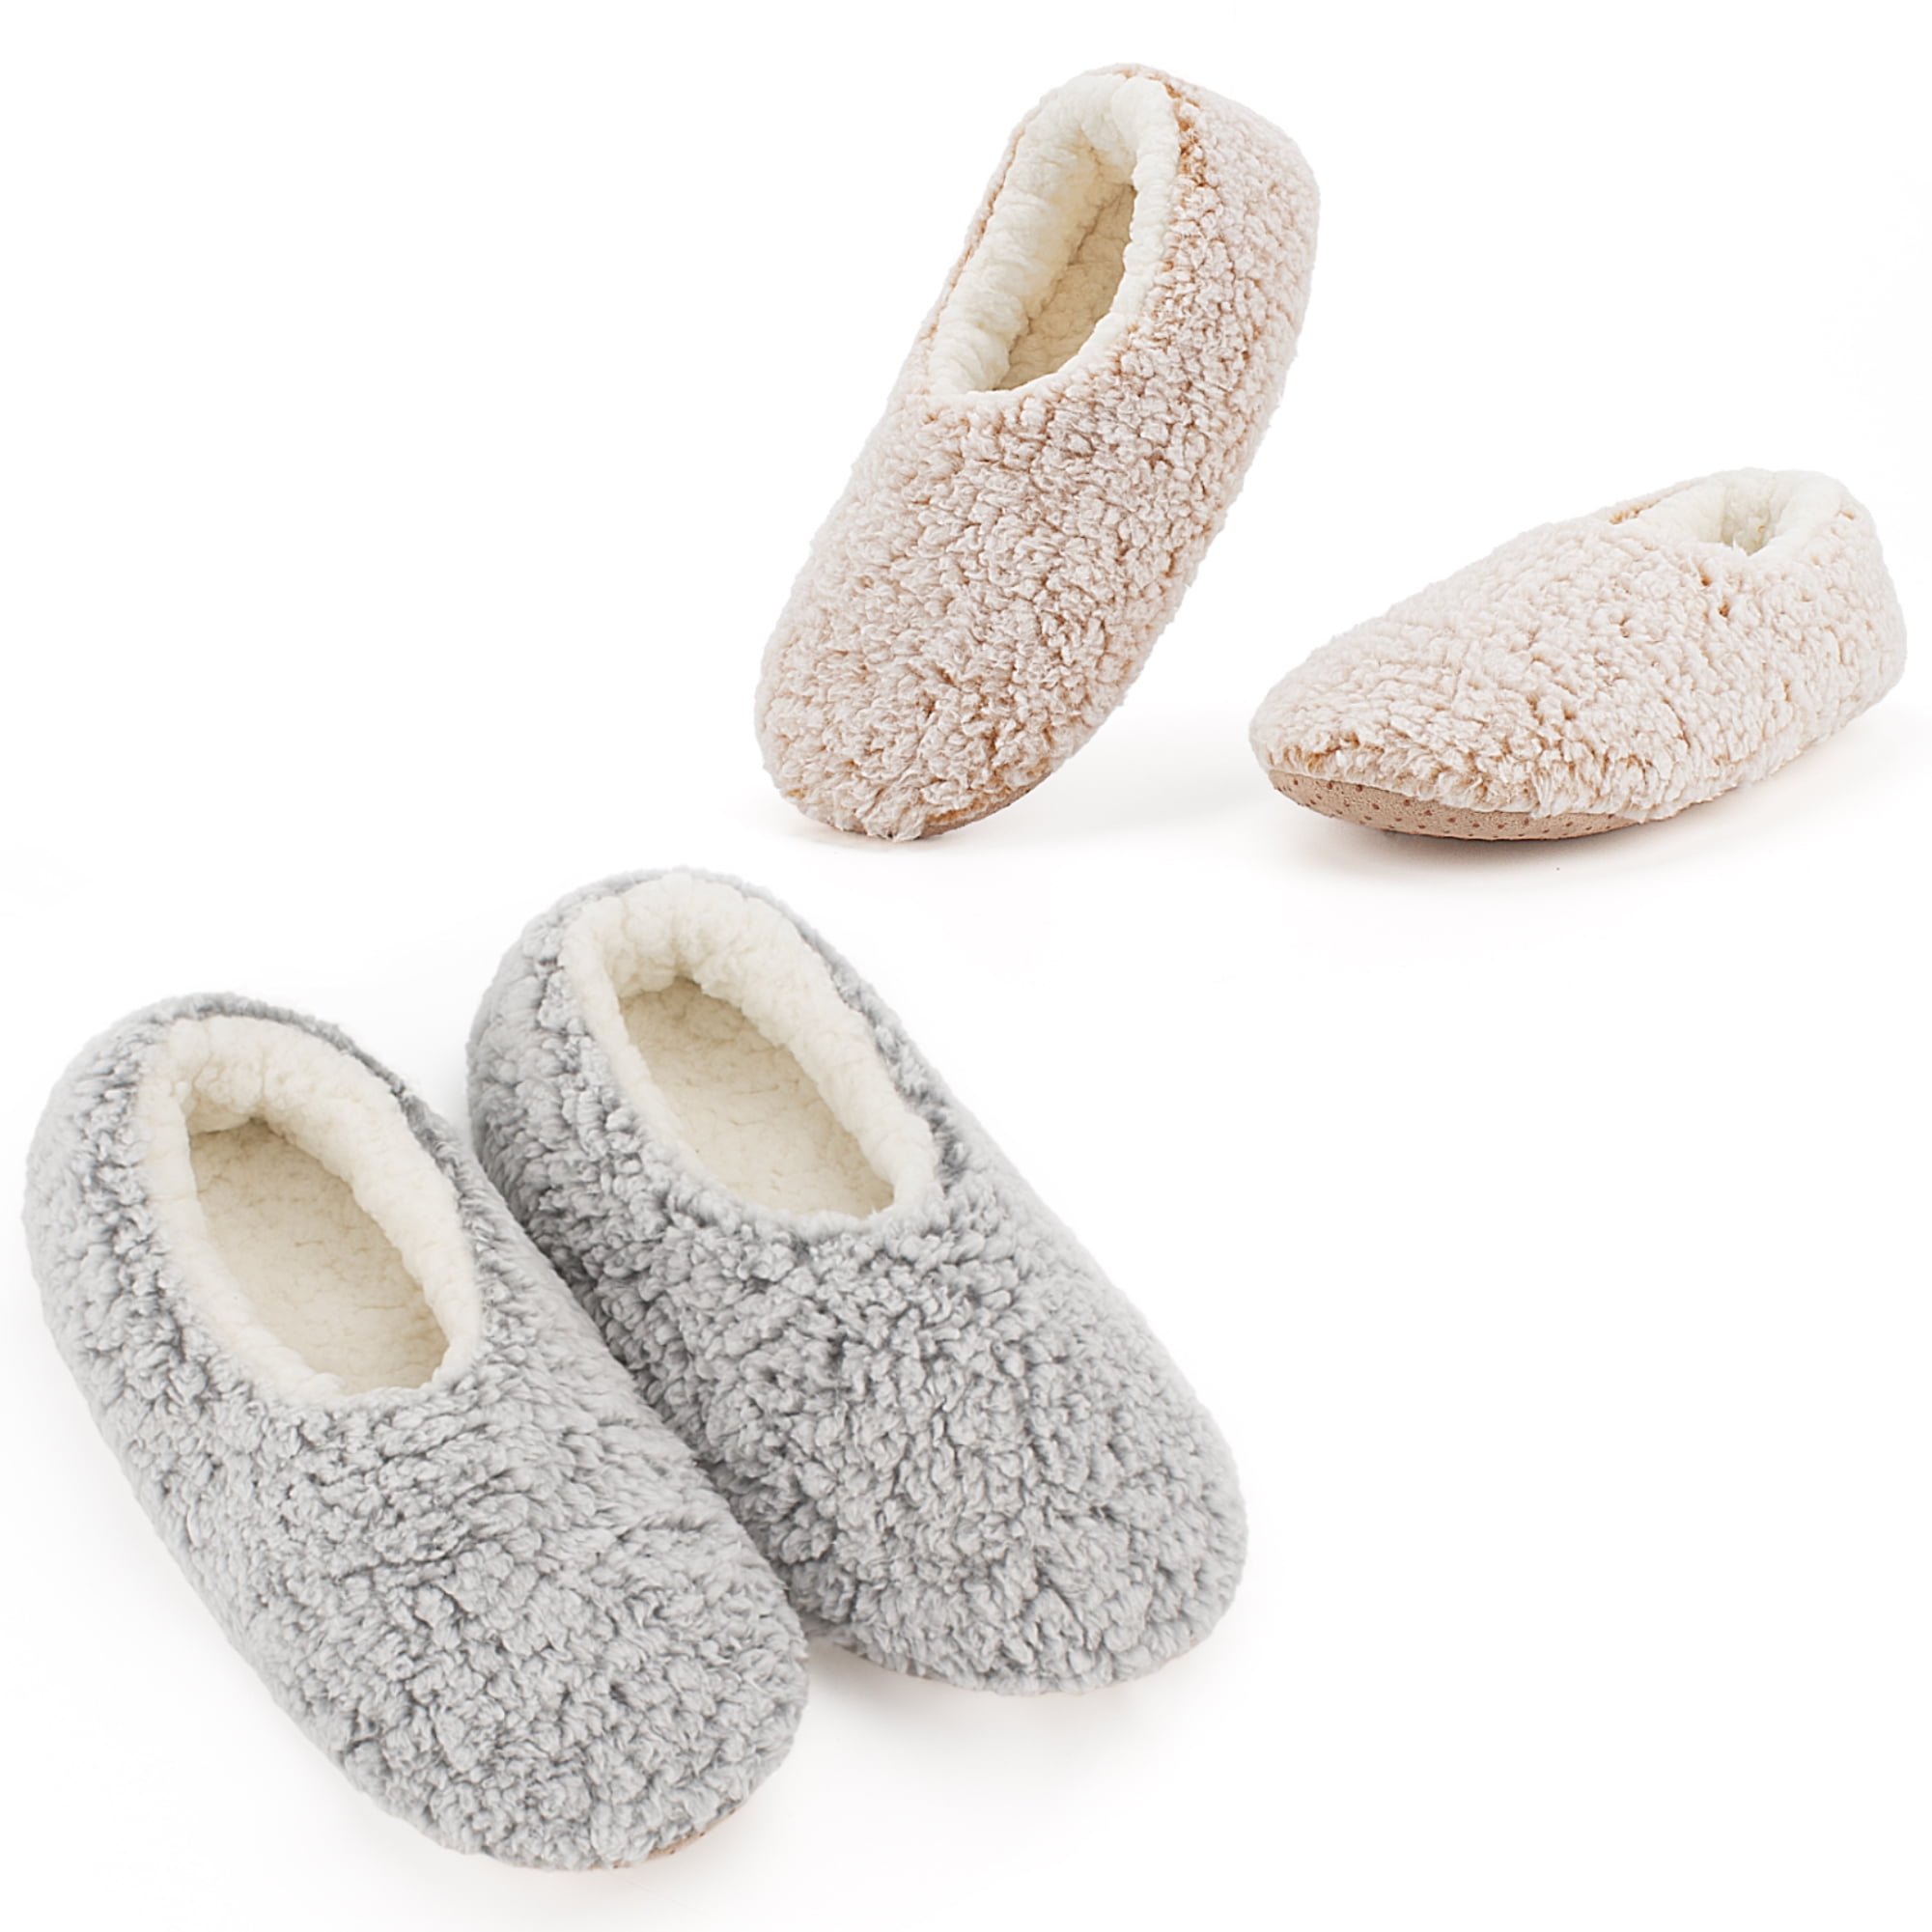 2-Pair Men's Slipper Socks Fluffy Sherpa Lined Winter Cable Knit Warm Gripper Sock Set Non-Skid Soles Cozy Soft Indoor Slippers with Grip Bottoms 